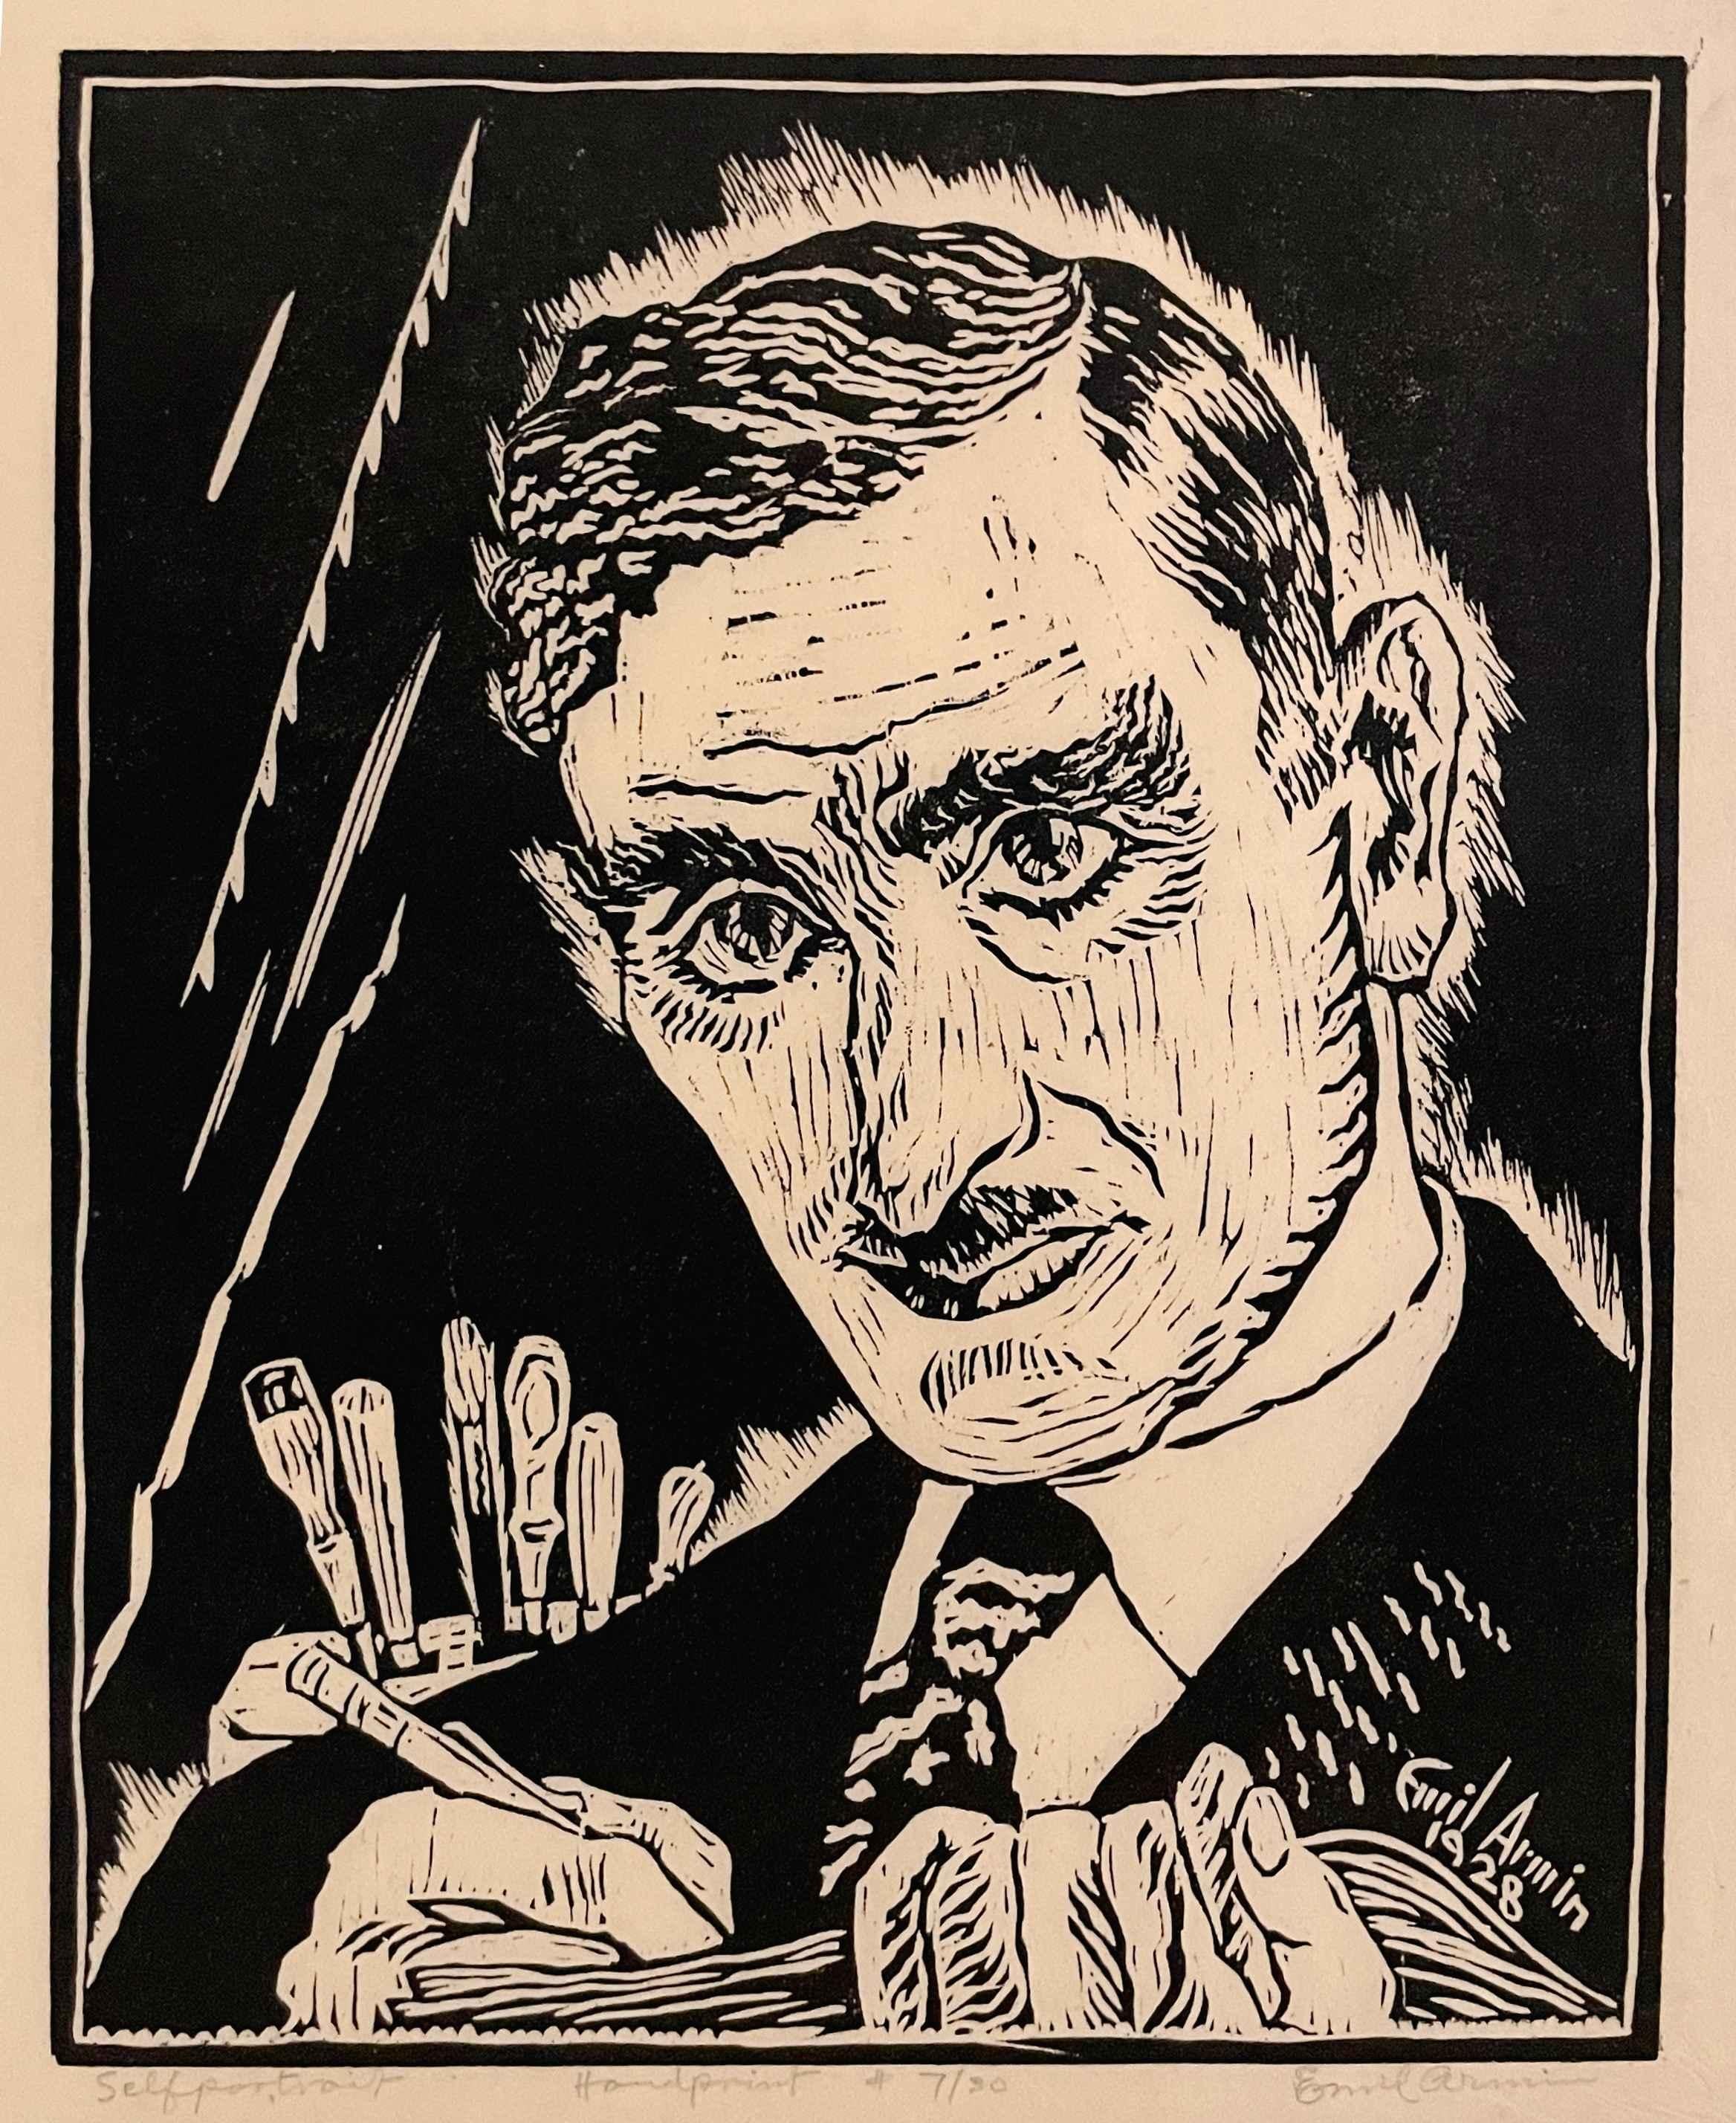 A woodcut on paper of a self-portrait of artist Emil Armin.

Emil Armin was born in Radautz, Austria in 1883.   By the age of 10, Armin was orphaned and was raised by his older siblings.  He supported himself by working in restaurants and drew in